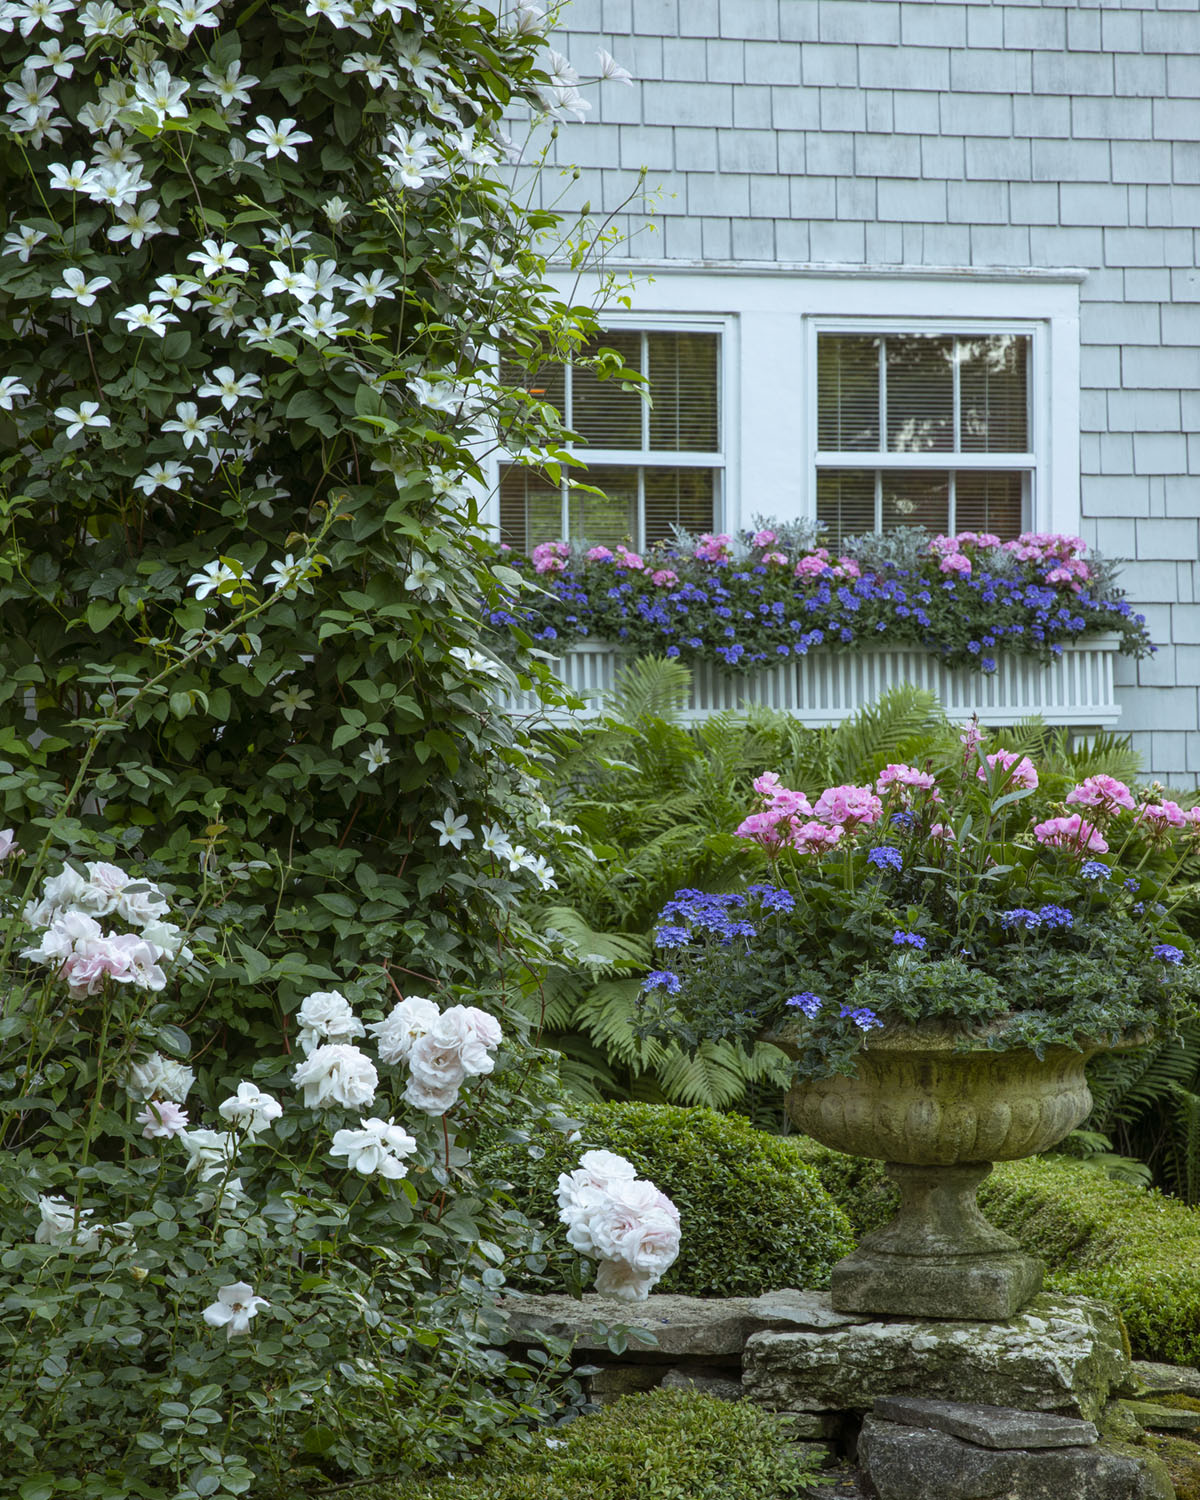 Caption from the book Gardens of the North Shore of Chicago: “Window boxes and urns overflow with pink geraniums and annuals while New Dawn climbing roses and white clematis scamper up a trellis.” (Lenhardt Garden in Winnetka)